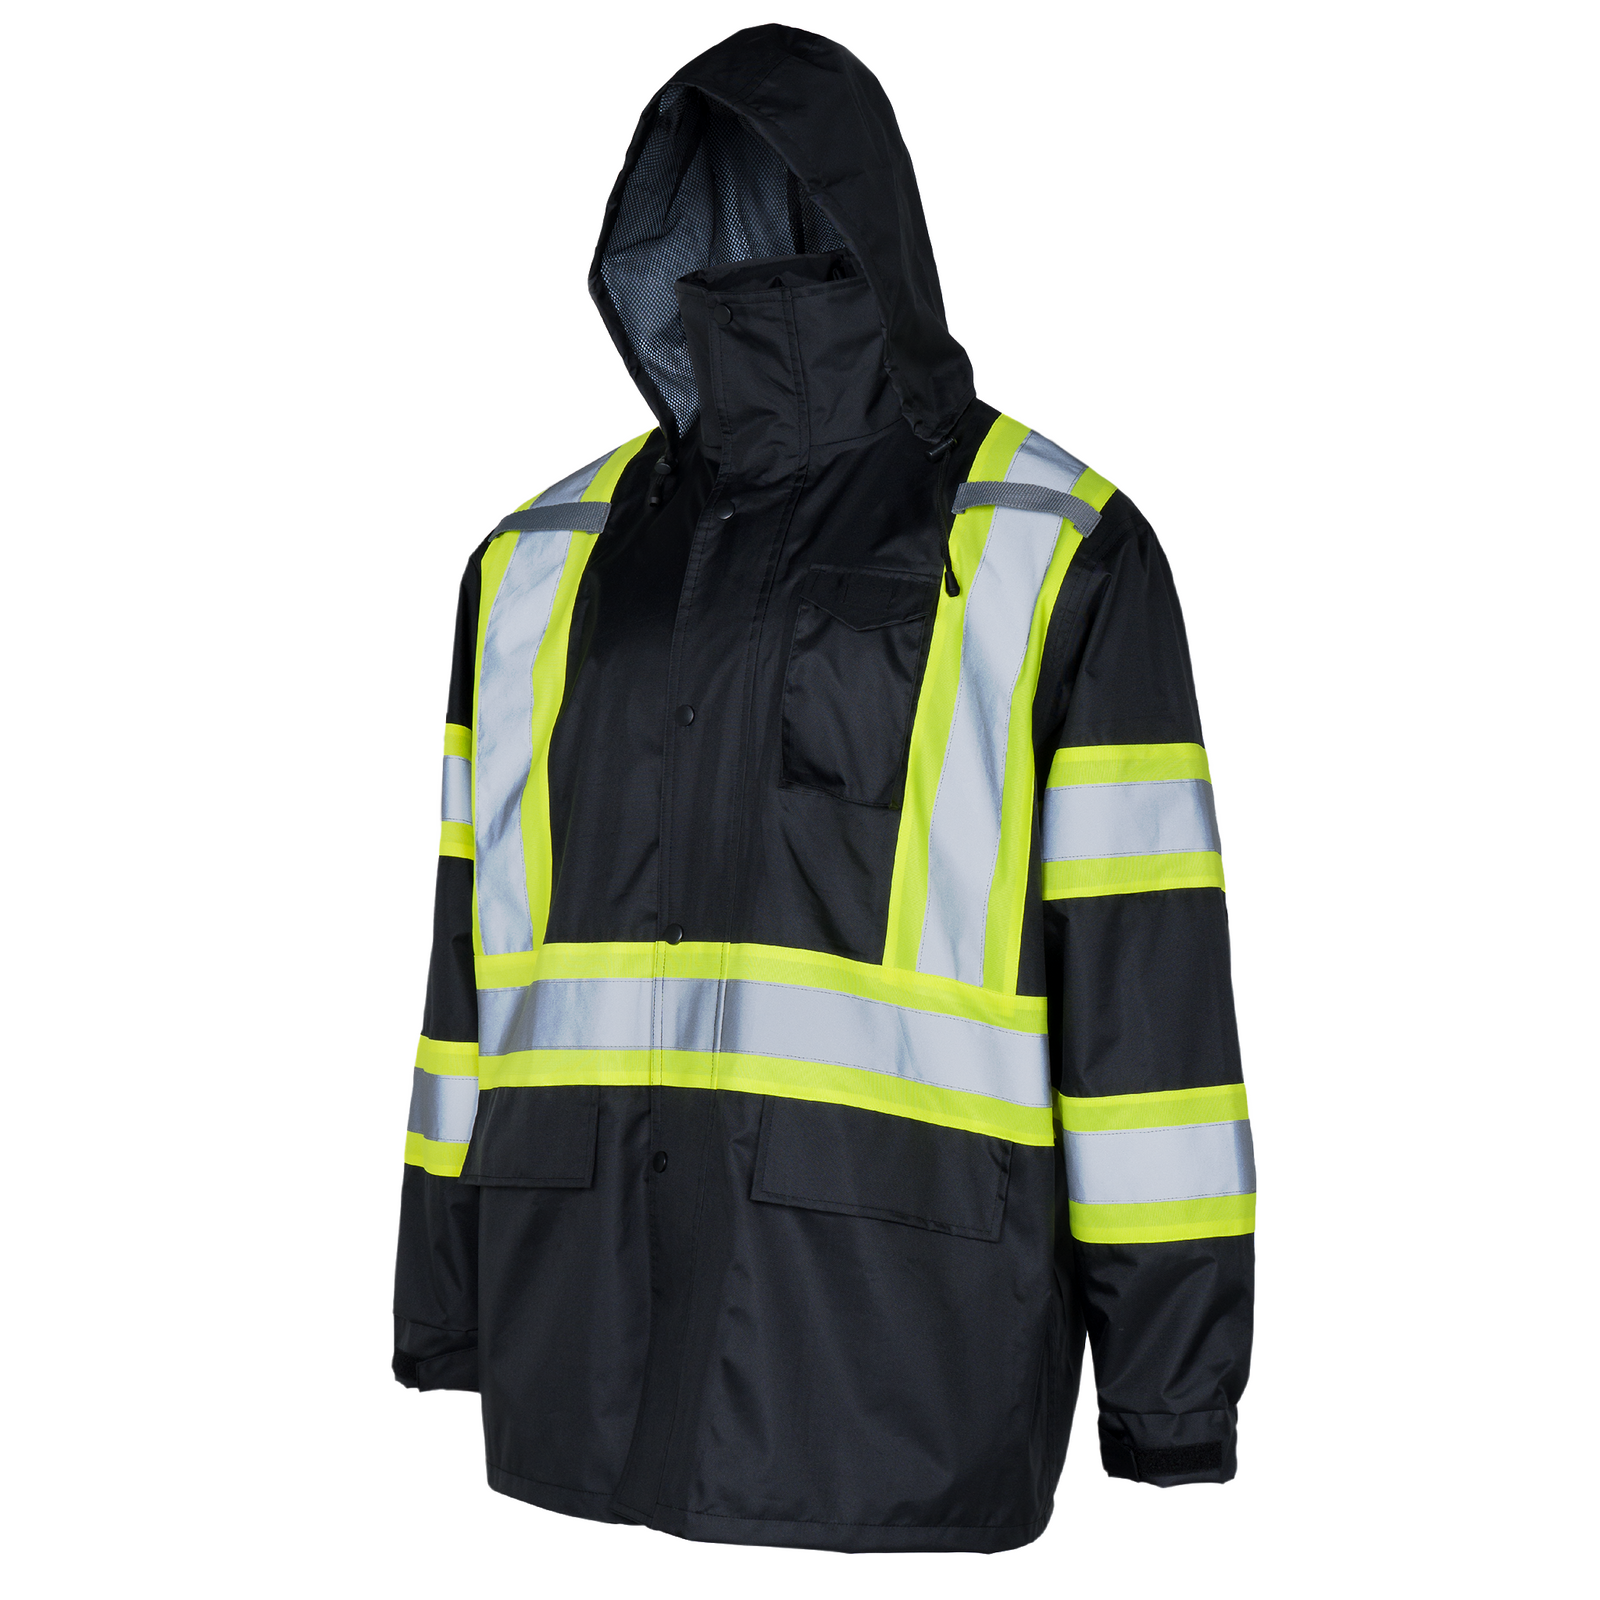 Black high visibility two tone safety rain jacket with X reflective stripes and hoodie